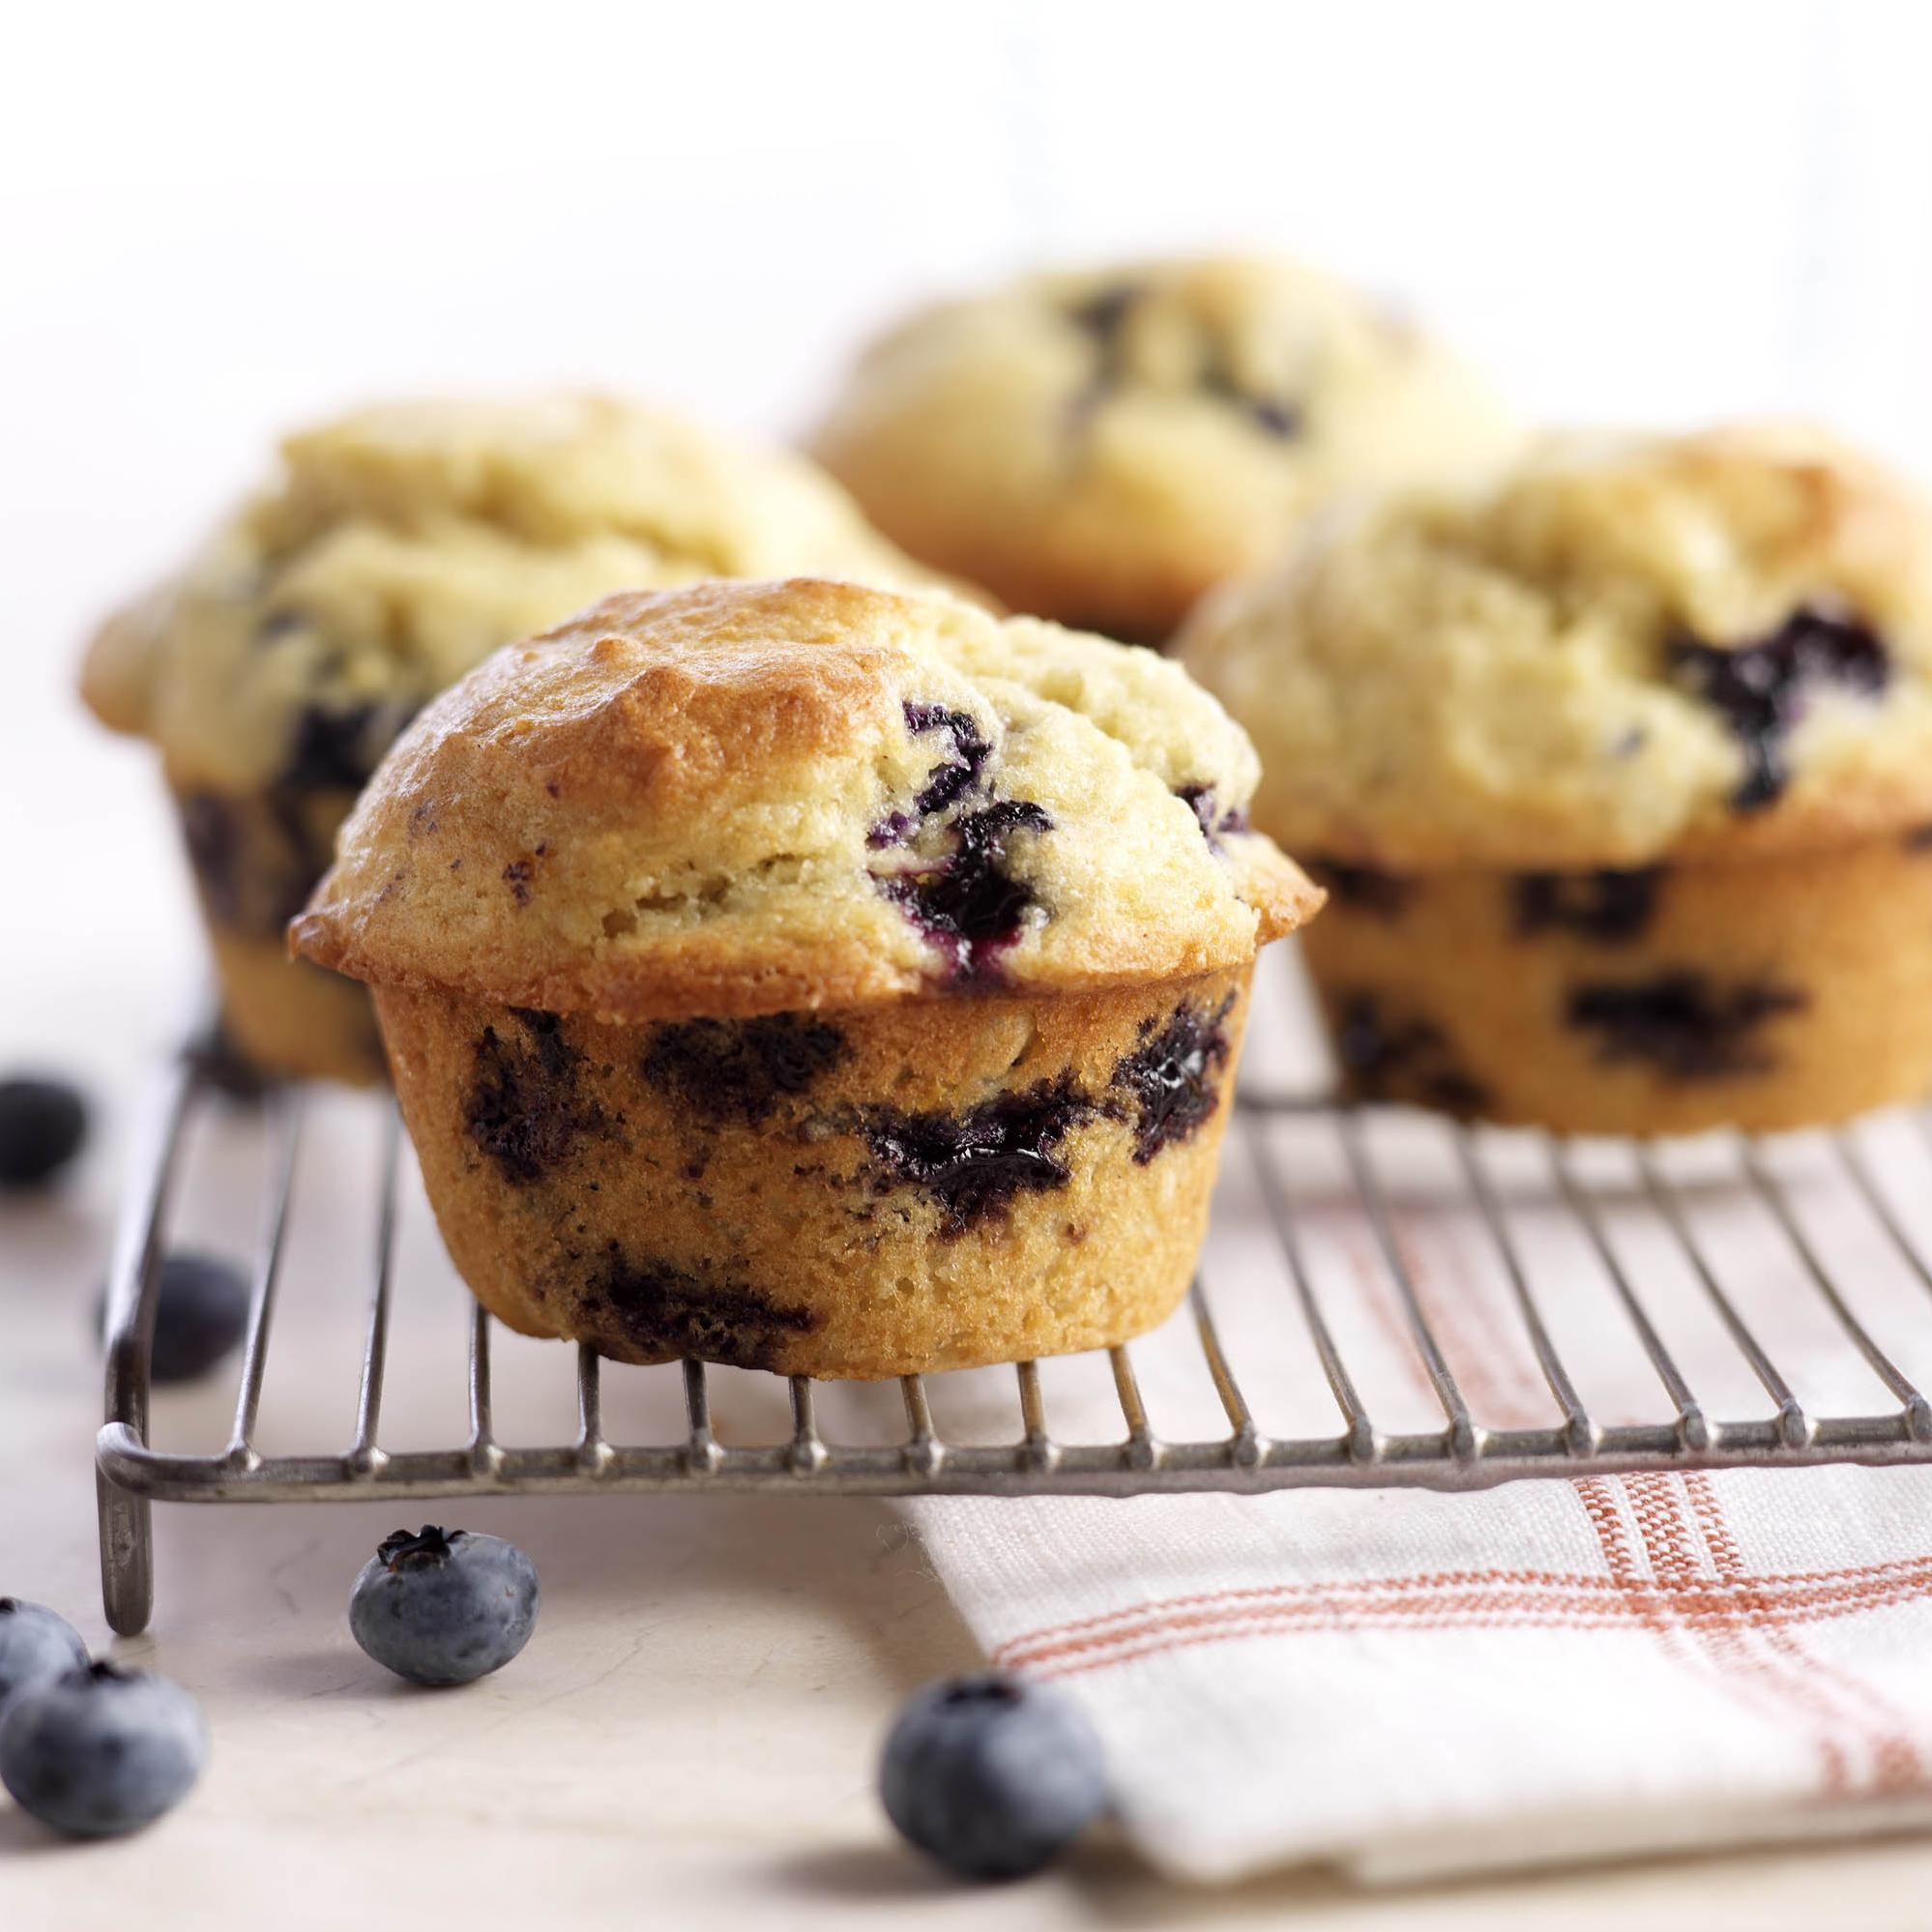  Satisfy your sweet tooth without compromising on taste or health with these gluten-free muffins.